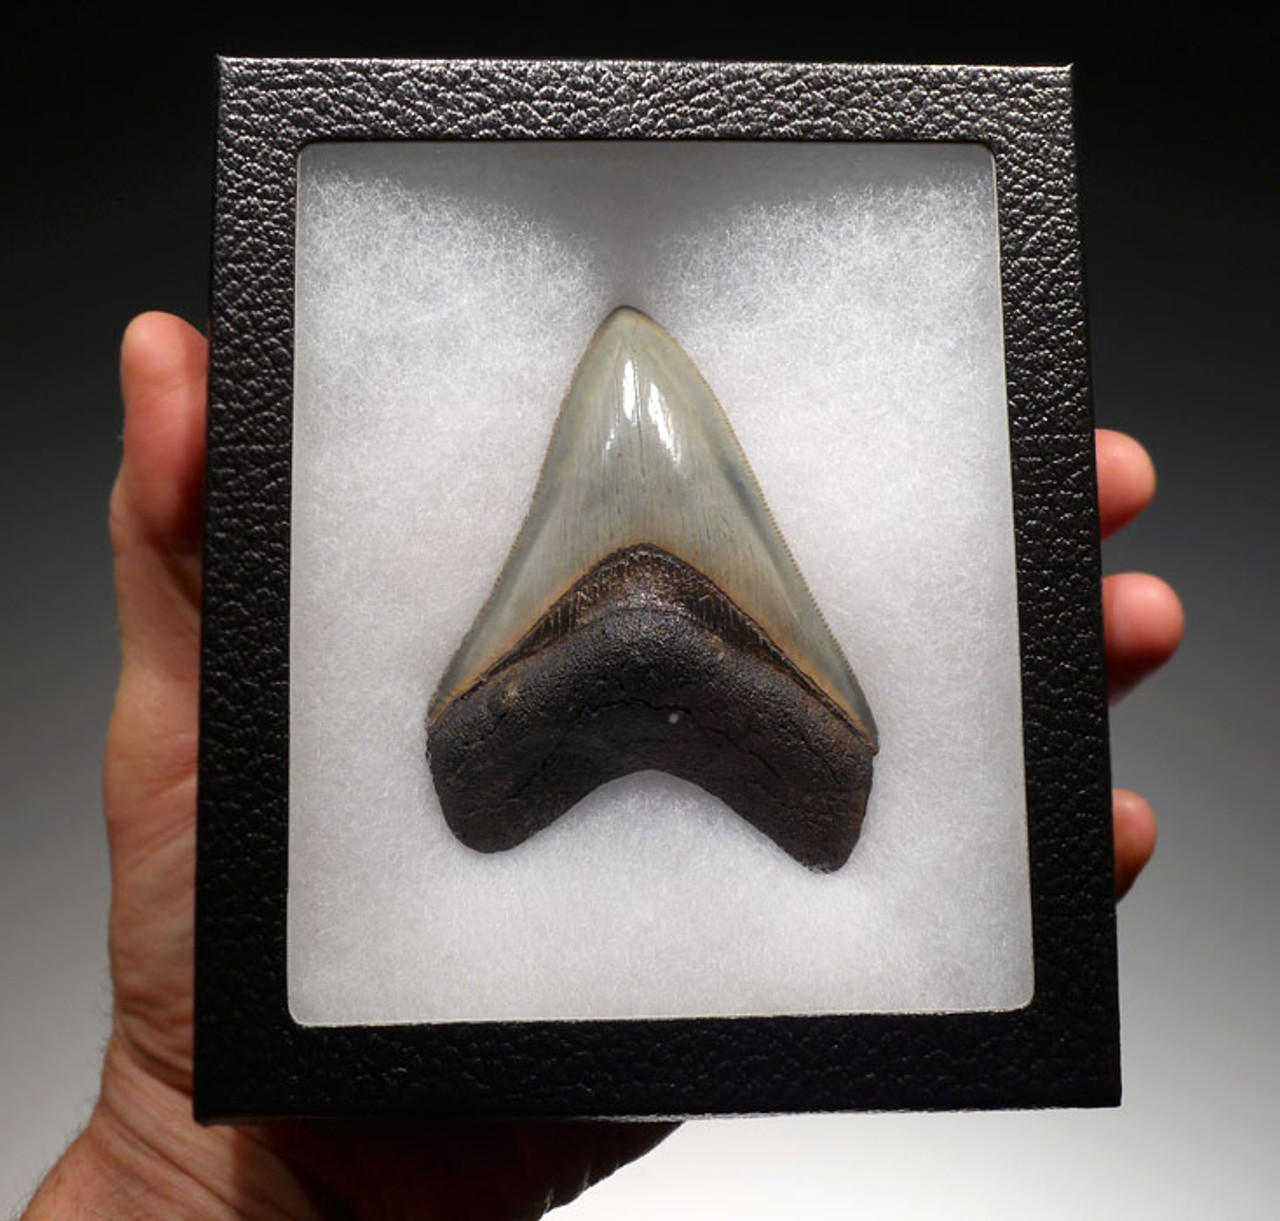 SH6-331 - FINEST GRADE 3.8 INCH MEGALODON SHARK TOOTH WITH COLORFUL ENAMEL